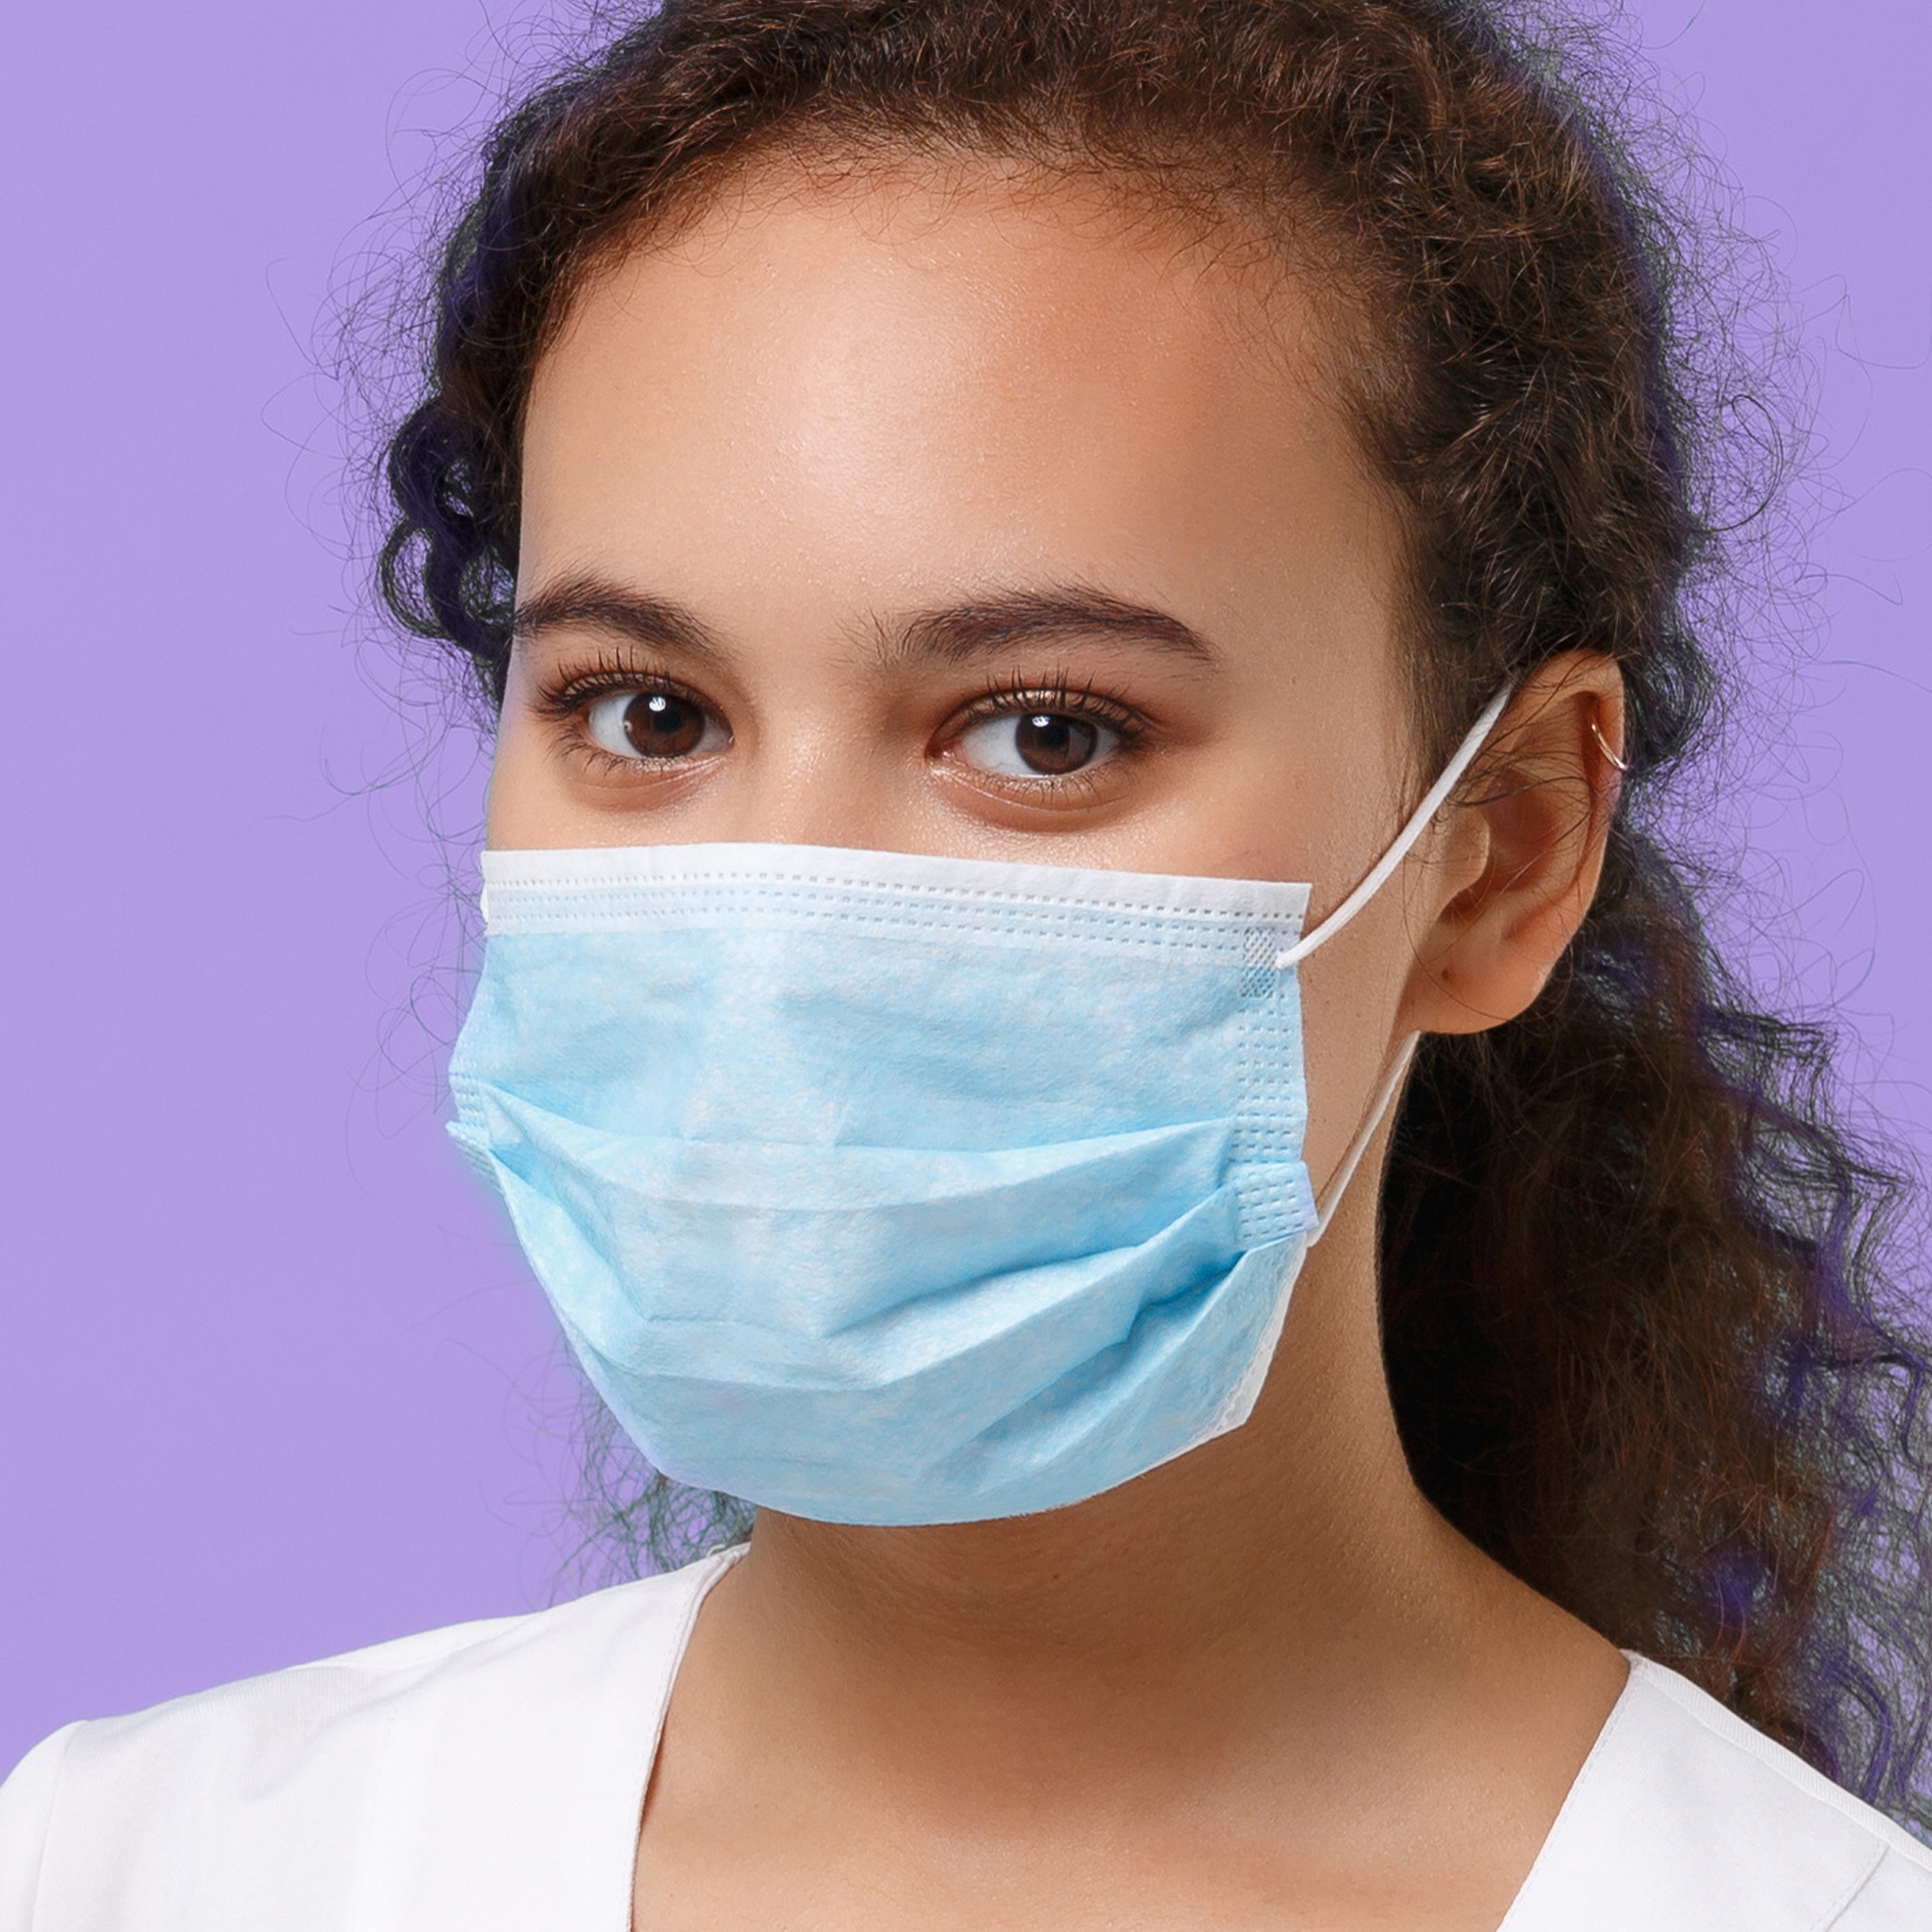 are face masks deductible medical expenses